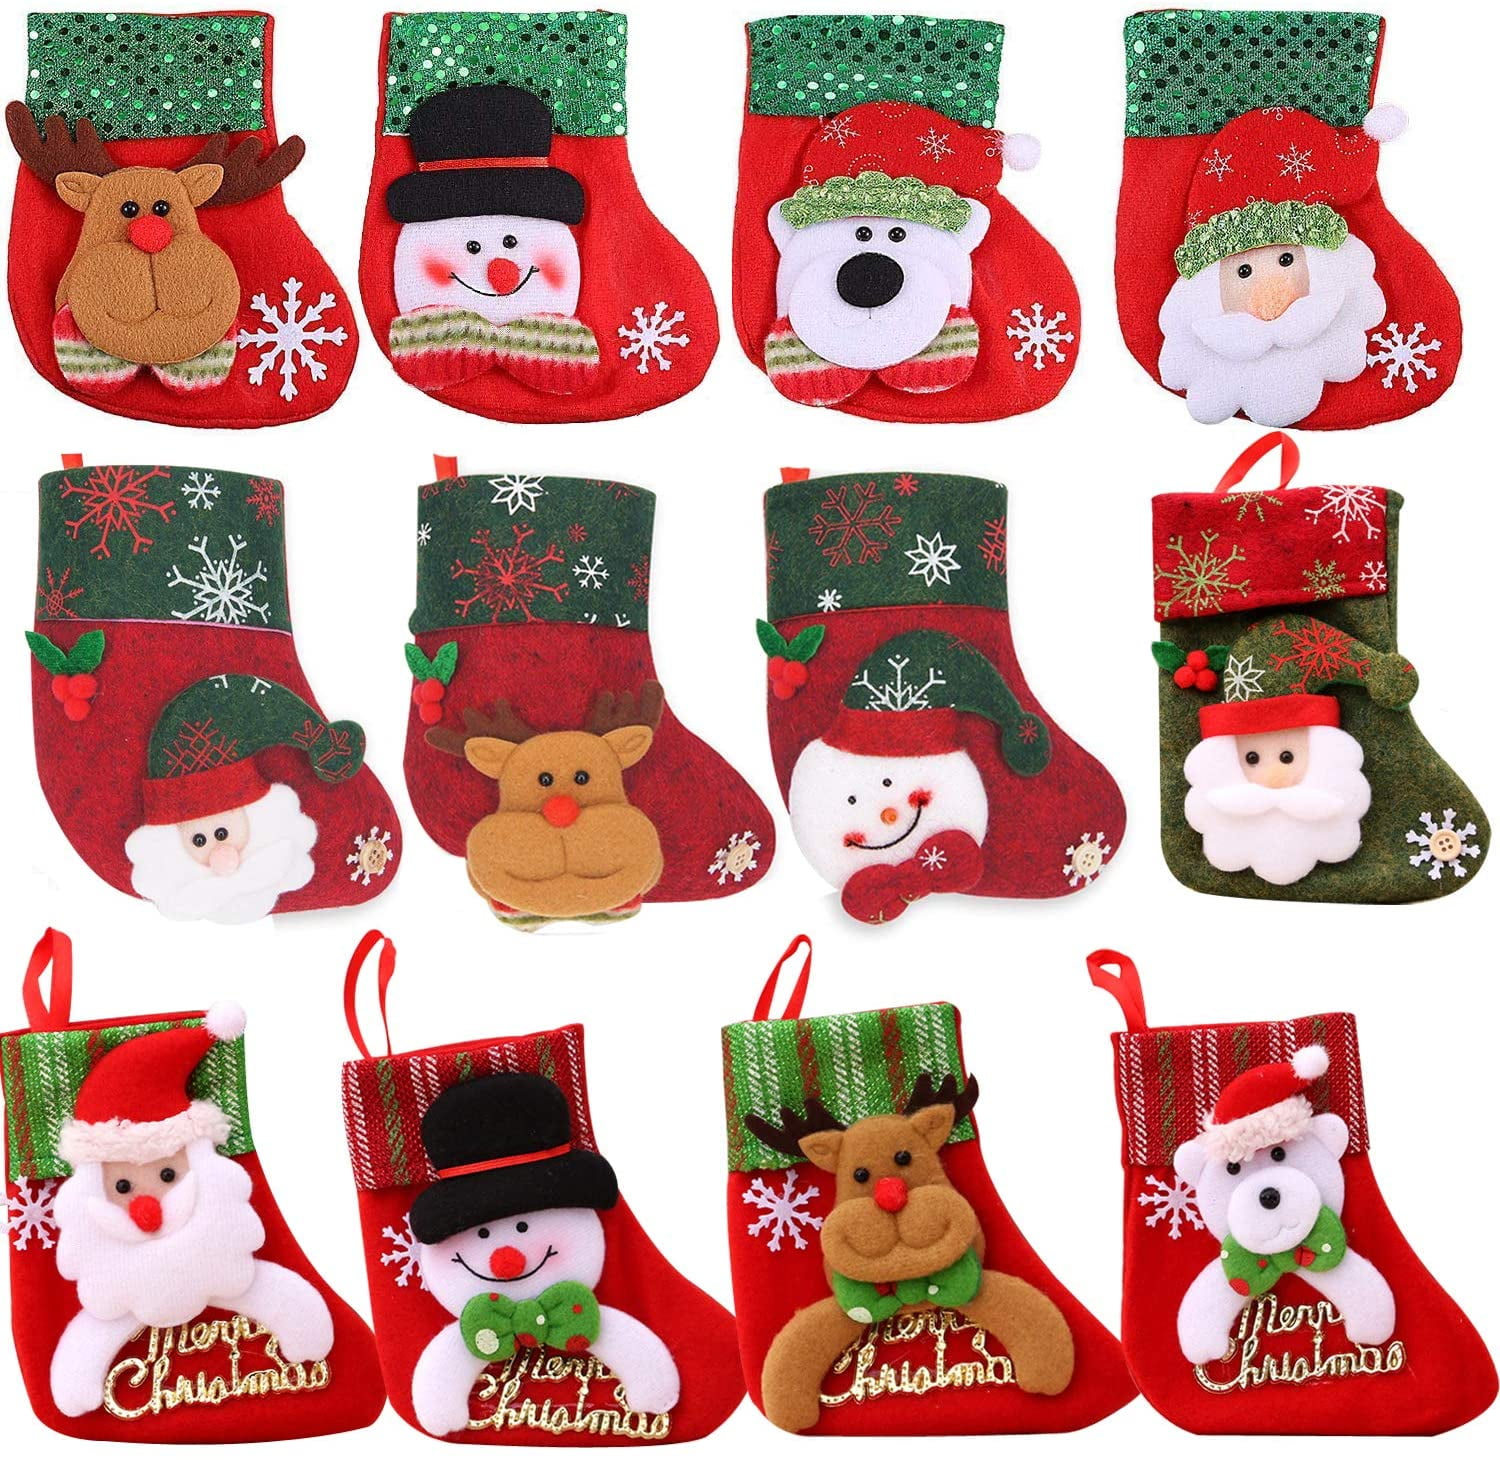 traderplus 12 Pack Mini Christmas Stockings Silverware Holders Candy Bags Xmas Tree Decorations